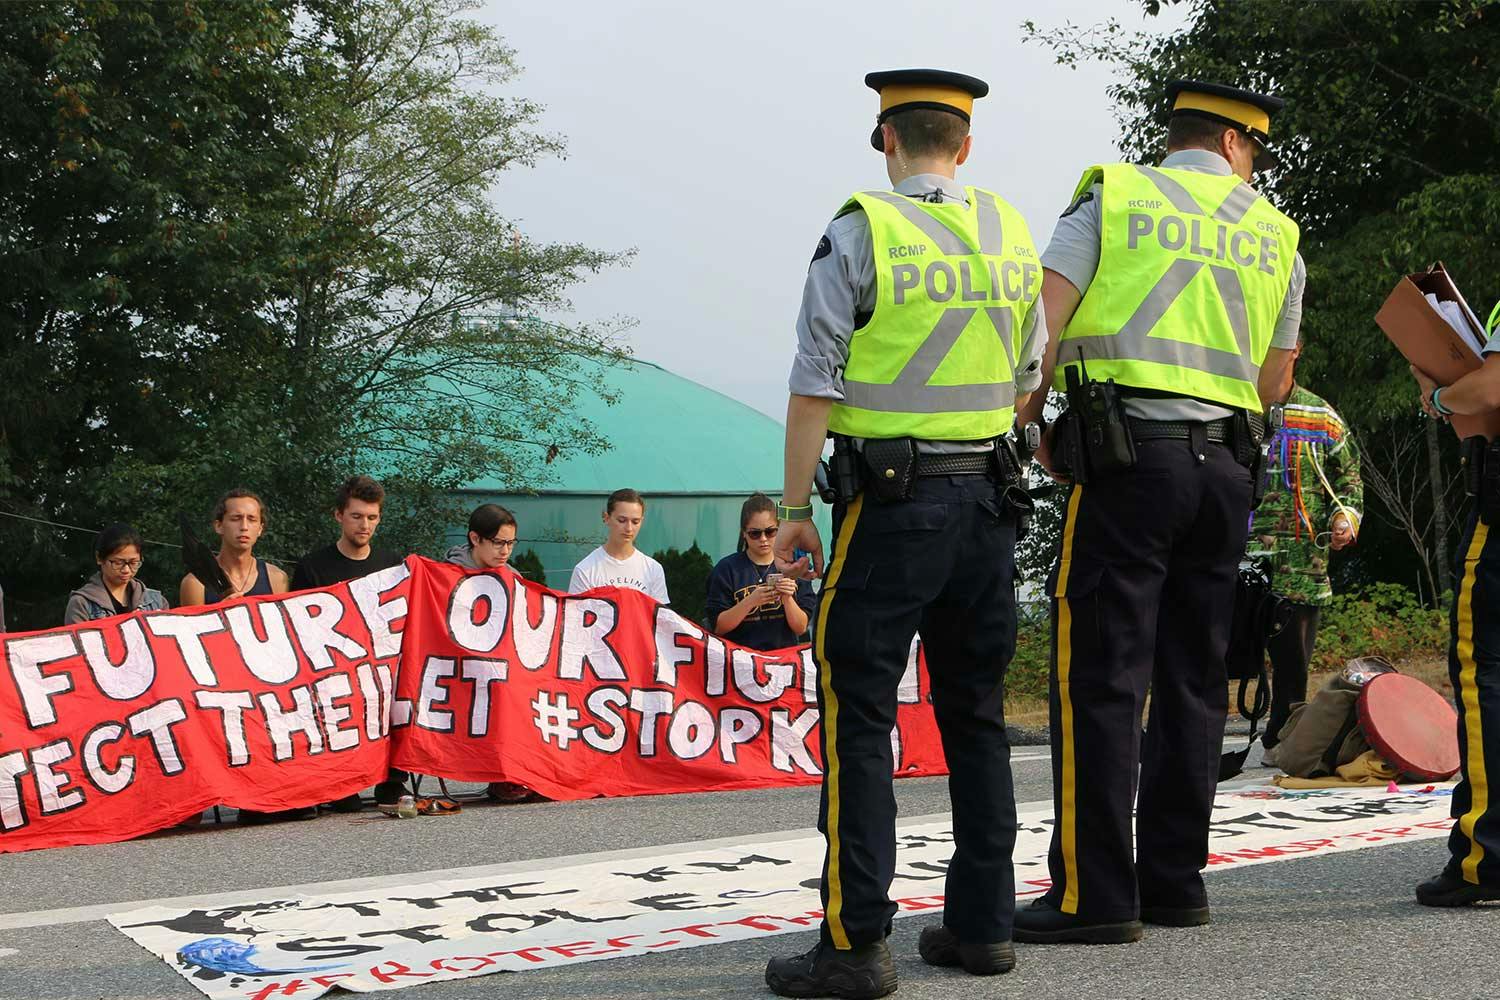 Two police officers in bright yellow vests stand before a group of activists with a red banner that says "Protect the Inlet".